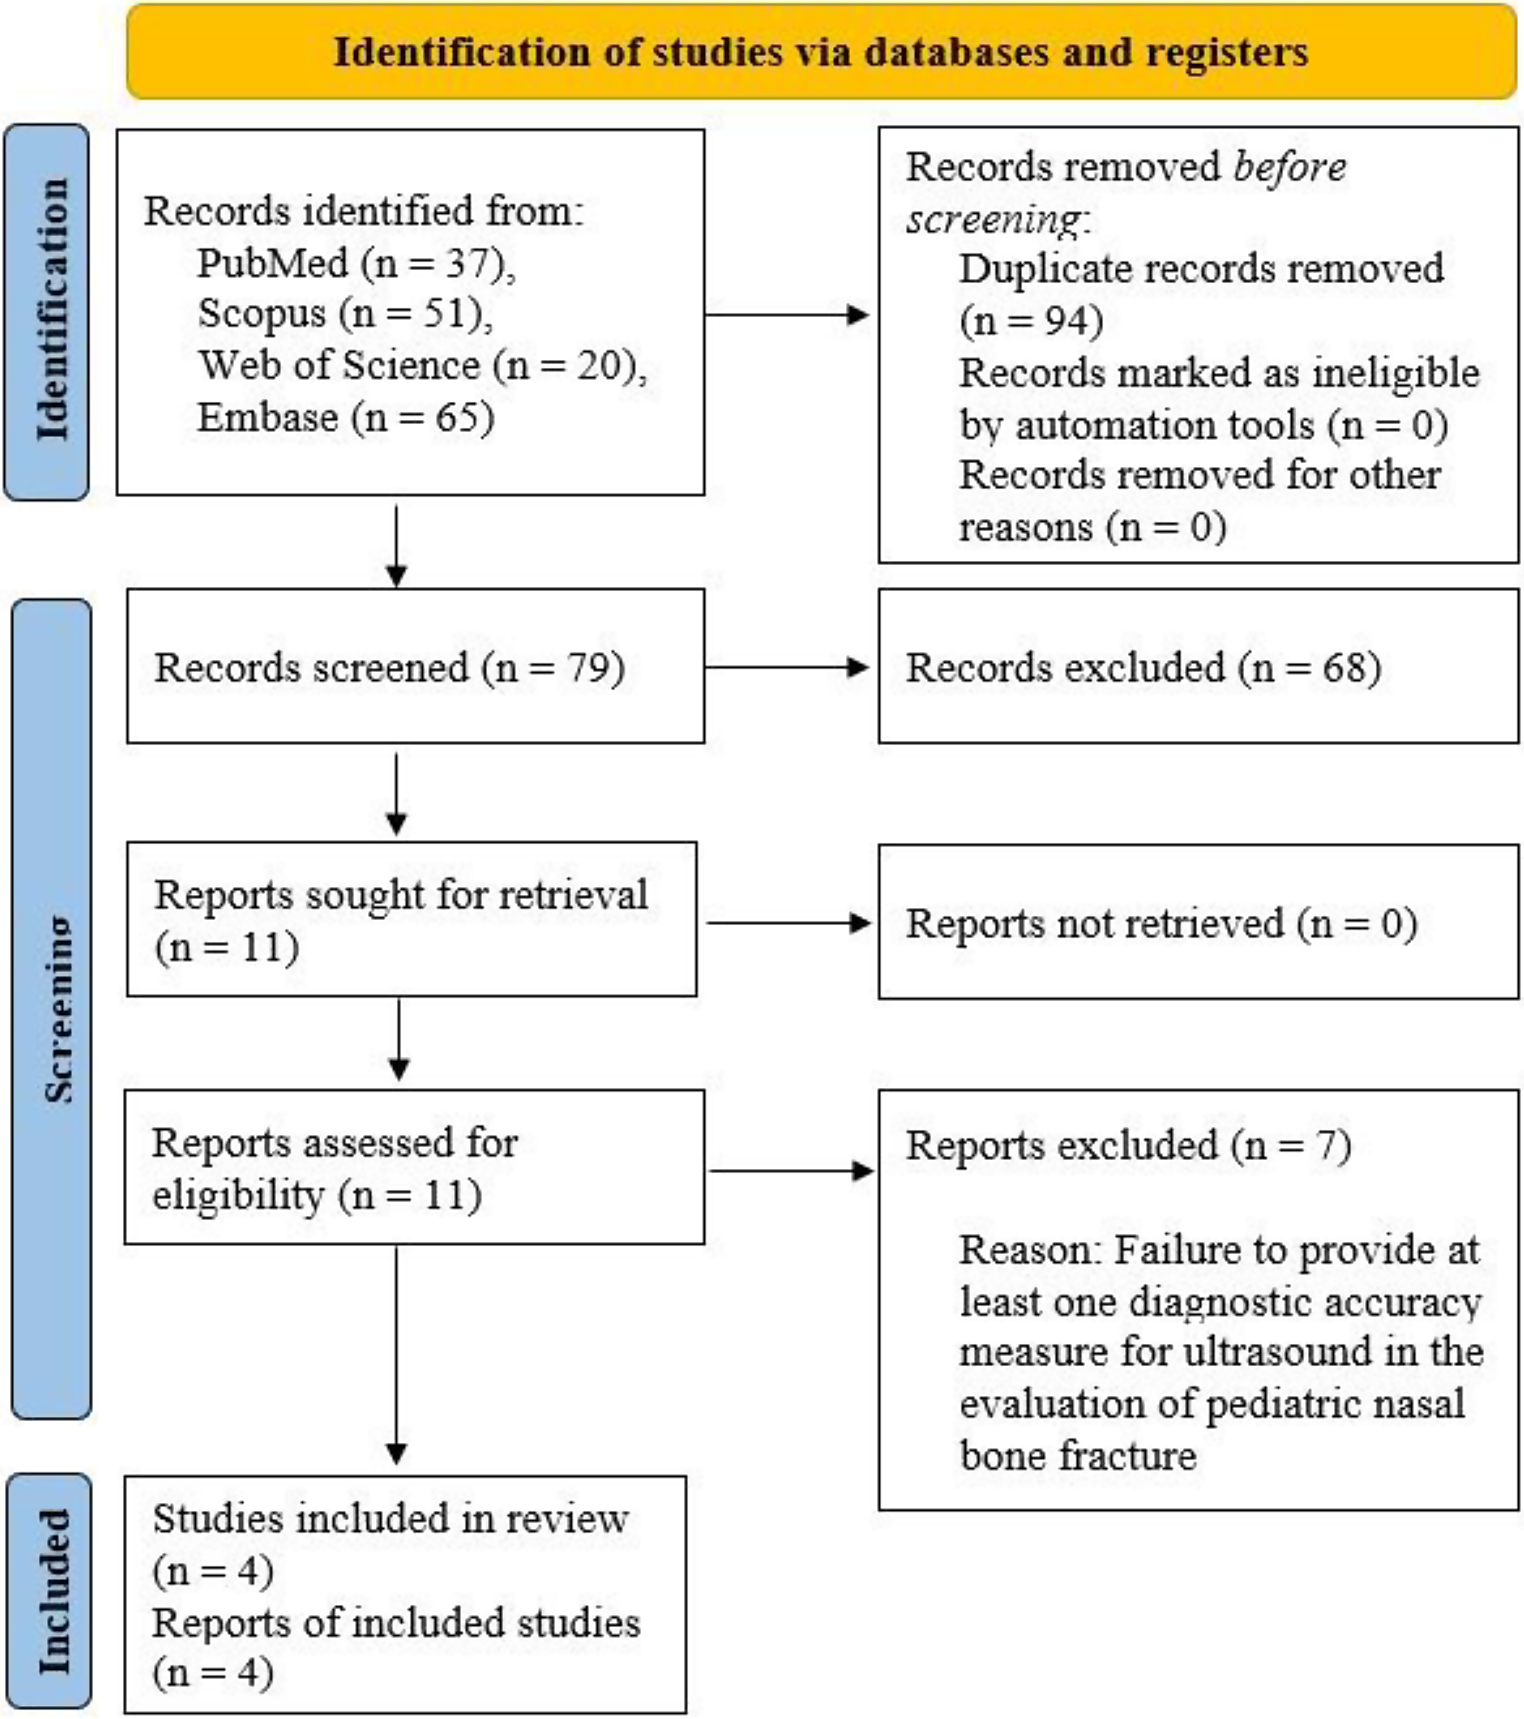 Diagnostic utility of ultrasound in pediatric nasal bone fractures: a systematic review and meta-analysis